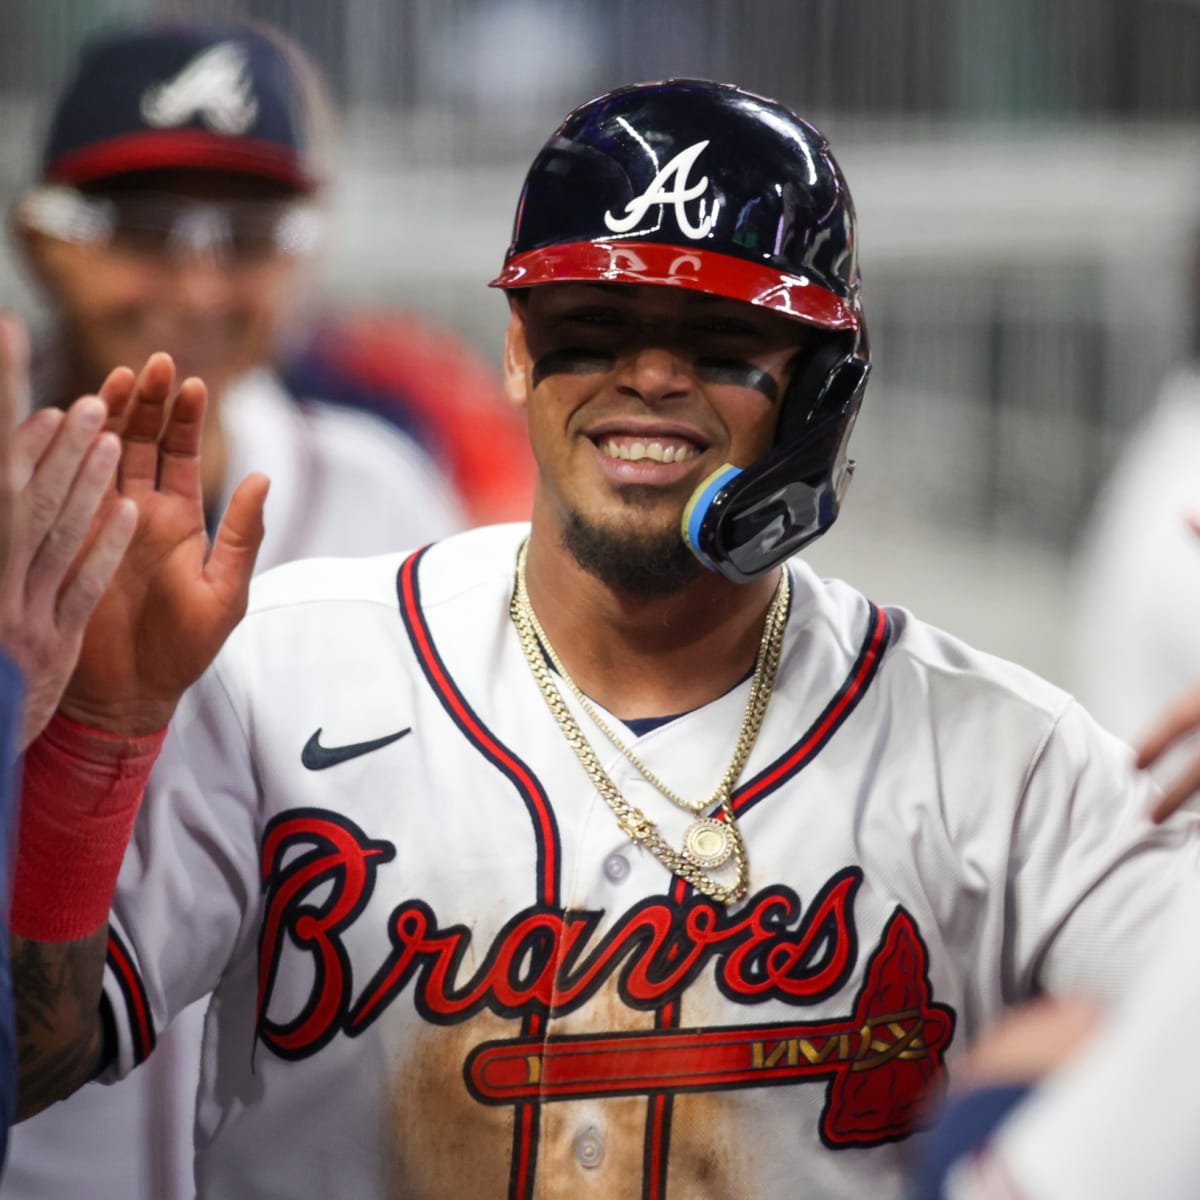 Orlando Arcia is the Atlanta Braves starting shortstop. What is